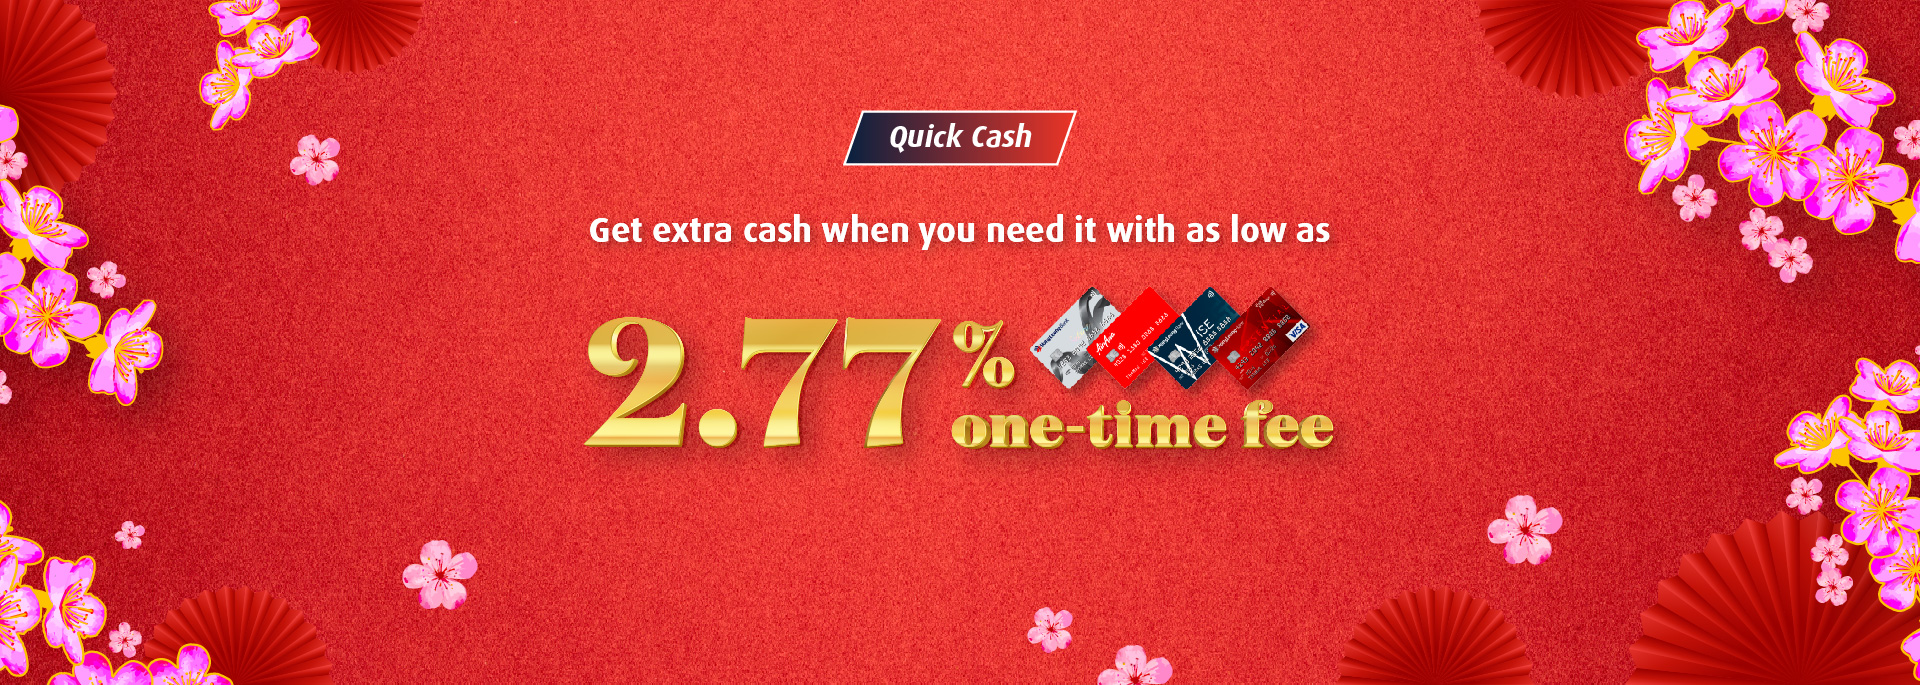 Apply for HLB Quick Cash today and enjoy this exclusive CNY offer